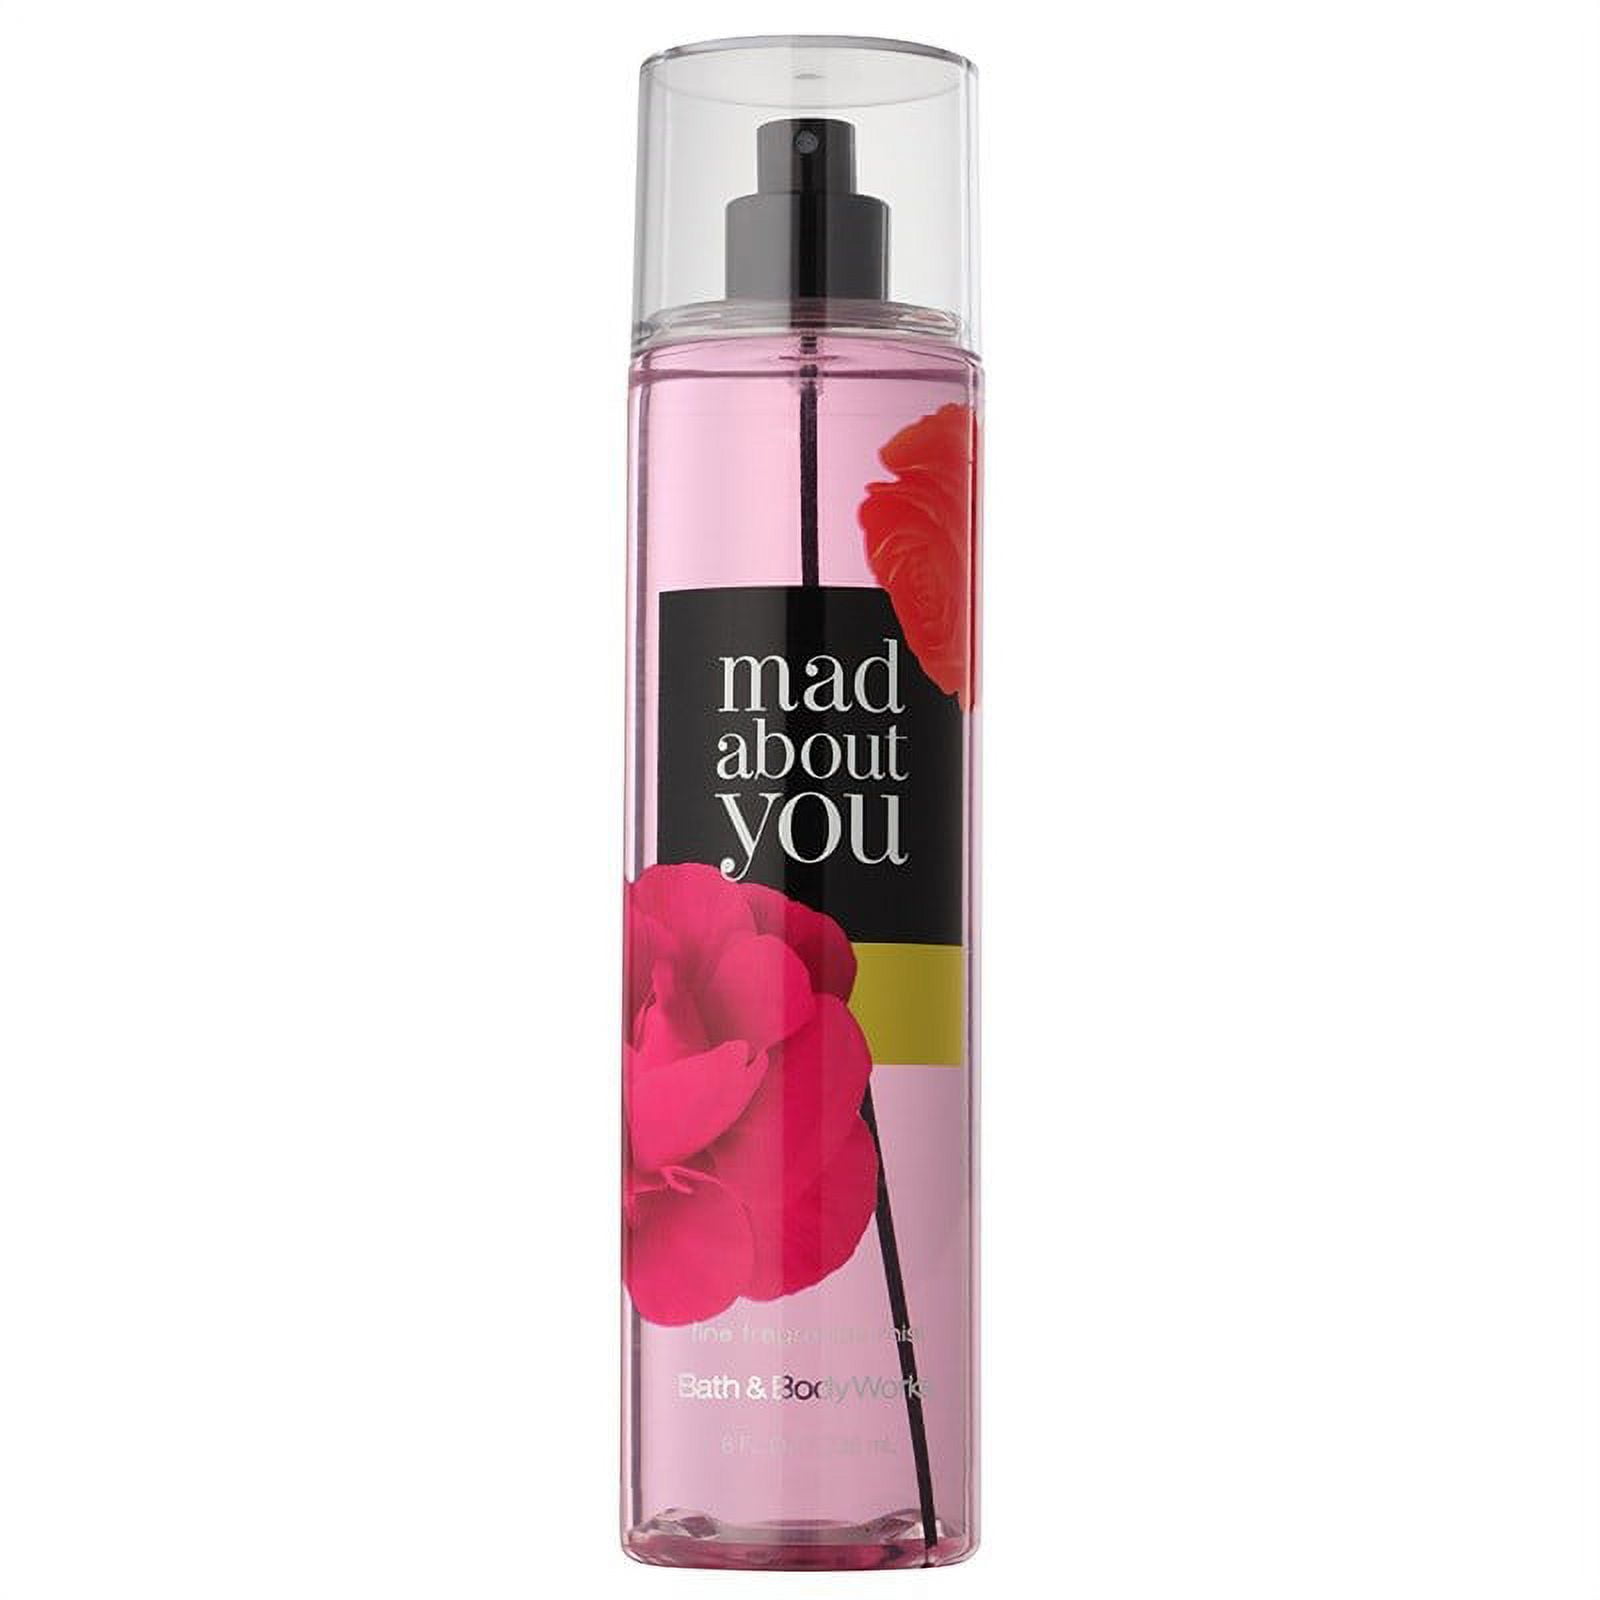 Mad About You by BBW (W) Fragrance Body Oils